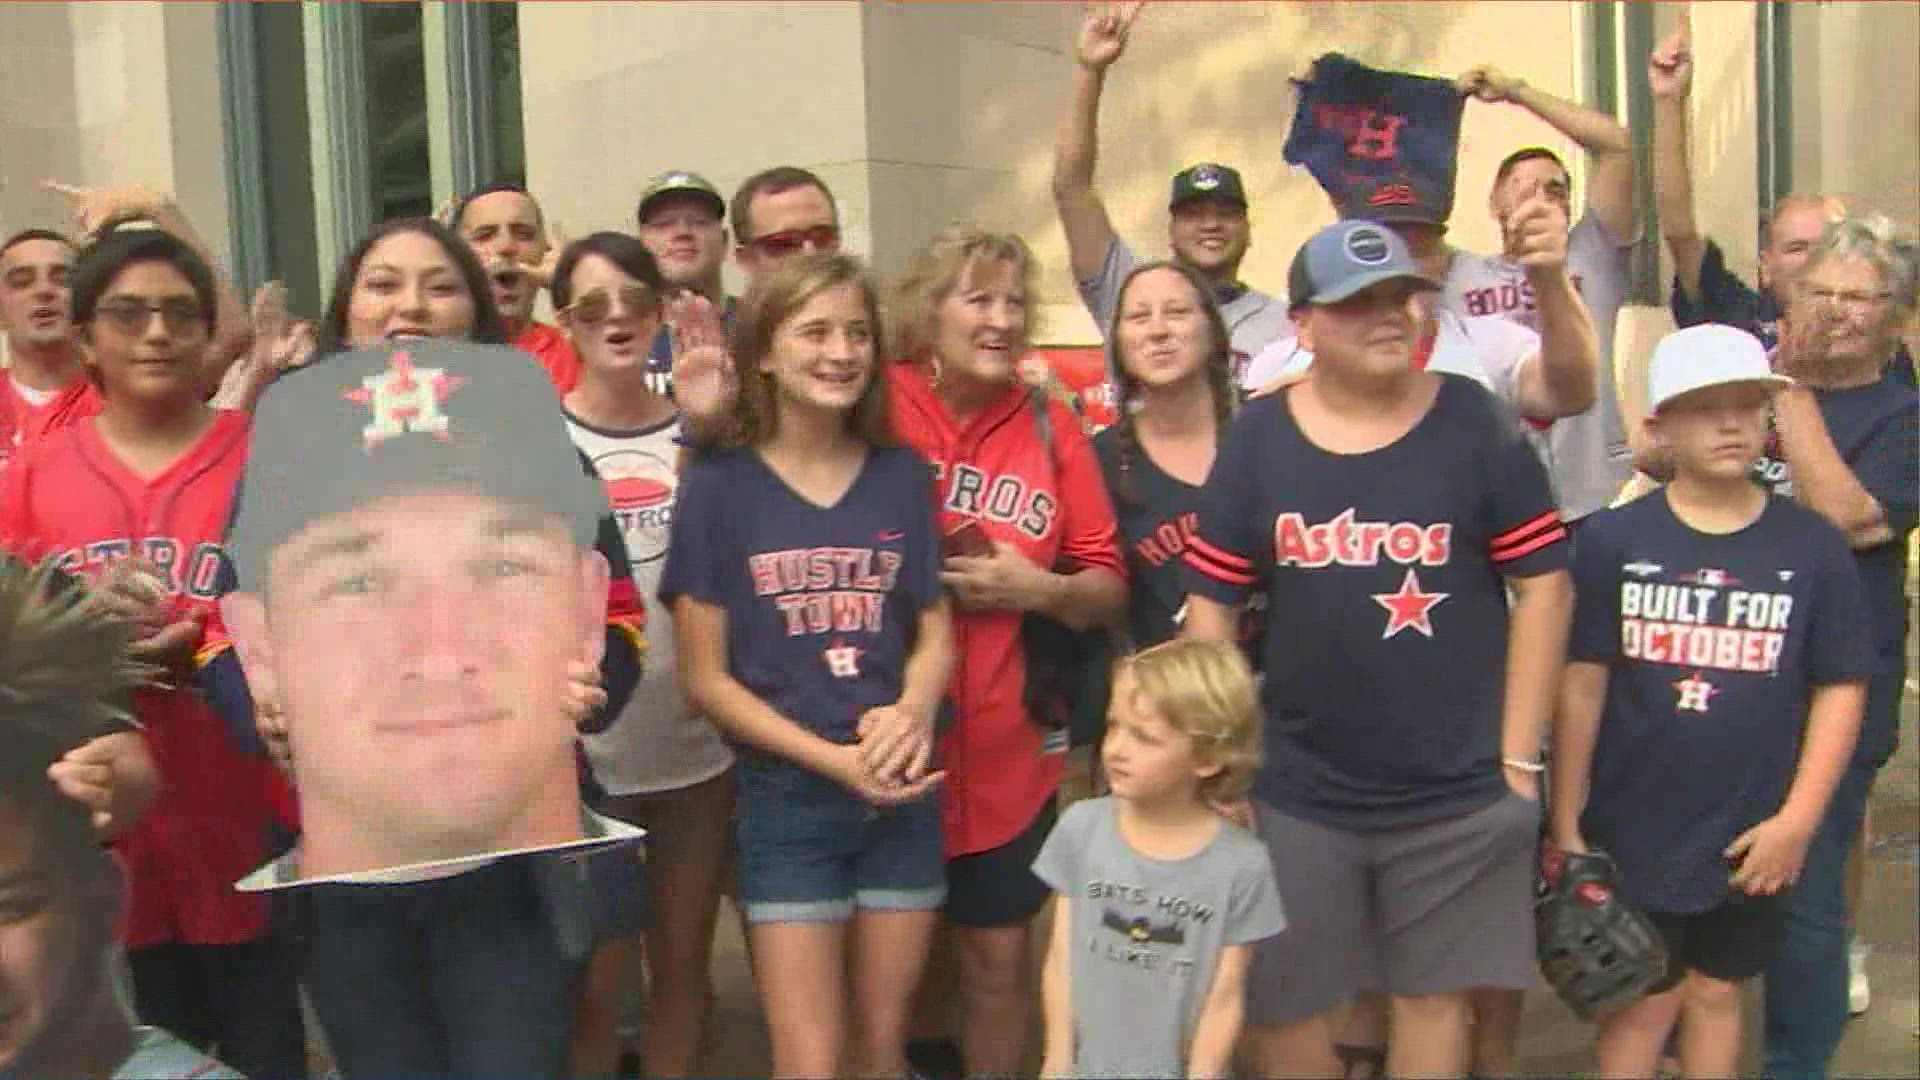 KHOU 11's Melissa Correa is with fans who are ready for the big game between Boston and the Houston Astros at Minute Maid Park.